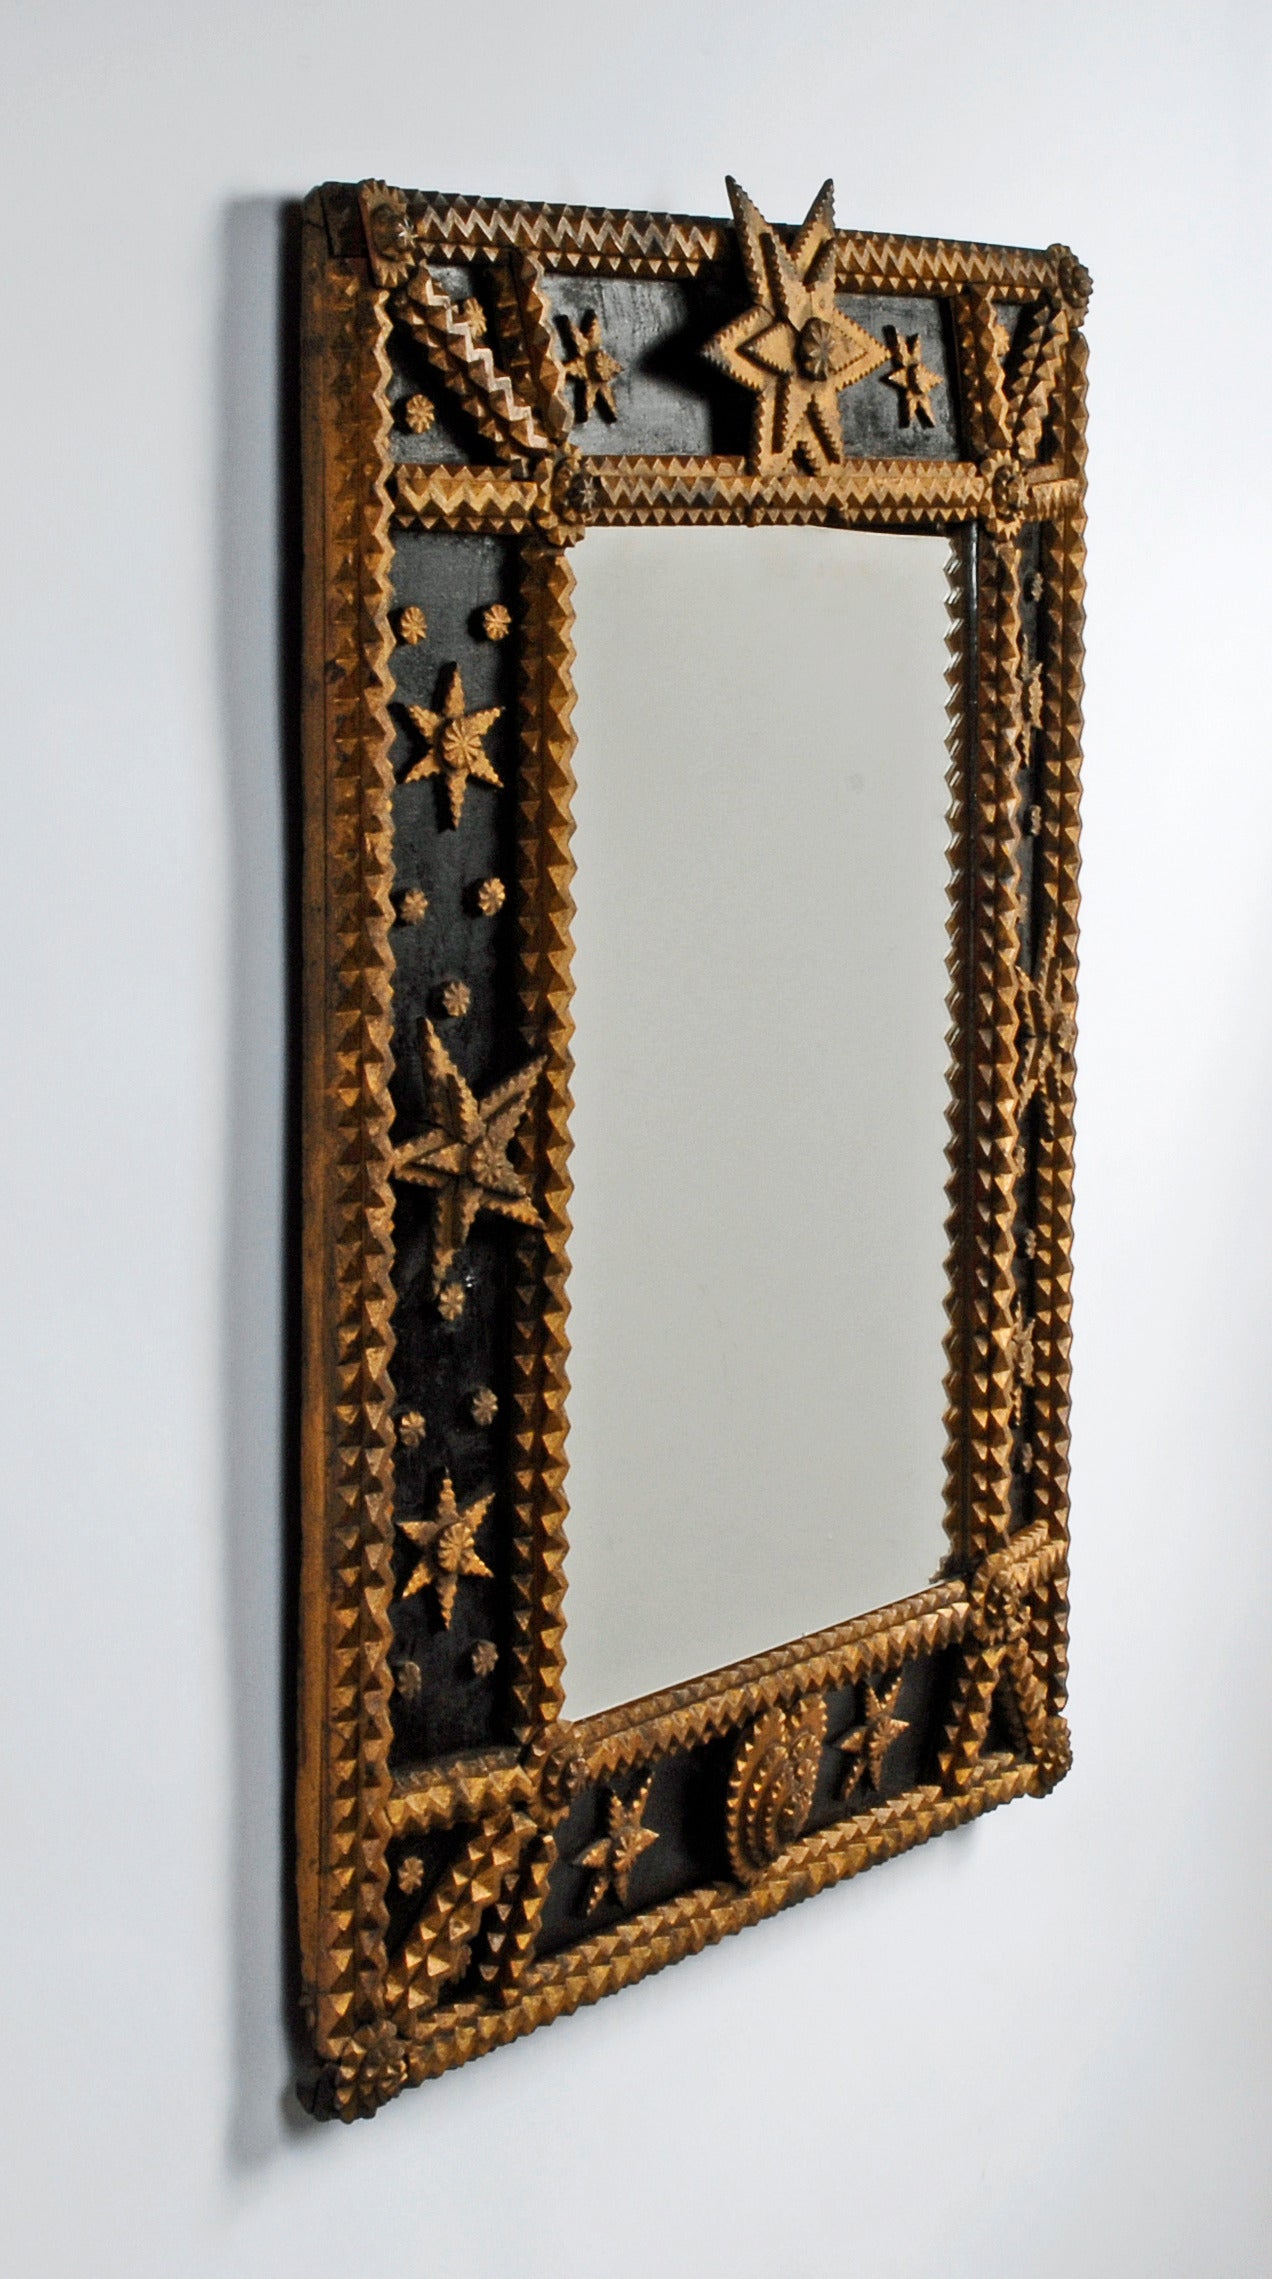 Early 20th Century Painted Tramp Art Mirror with Stars